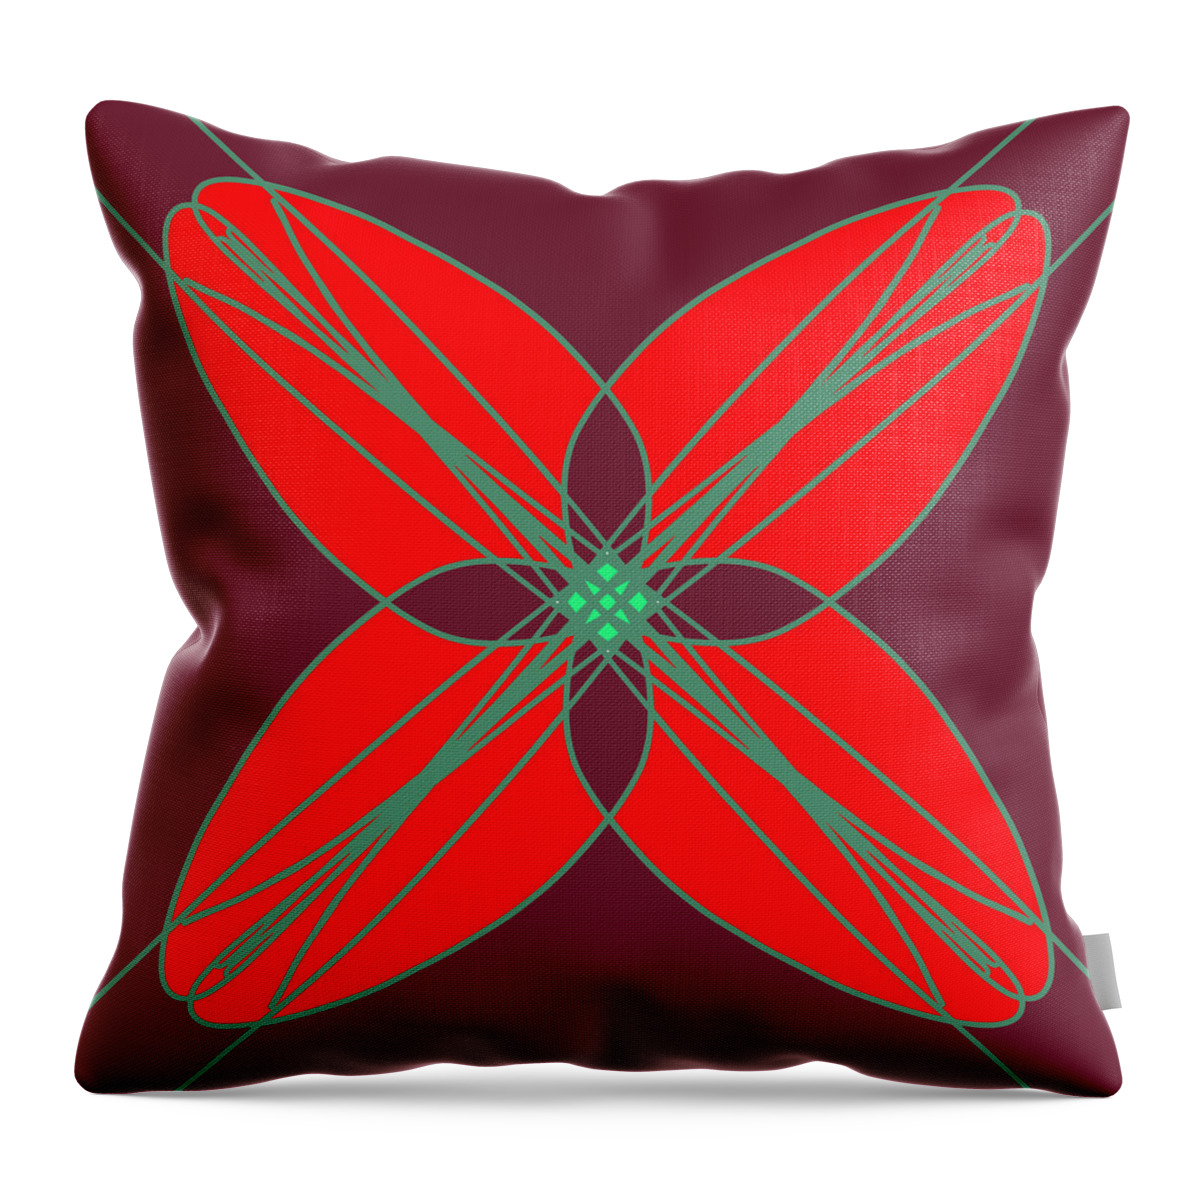 Decorative Illustration Throw Pillow featuring the digital art Geometrical Pattern - Red Flower by Patricia Awapara